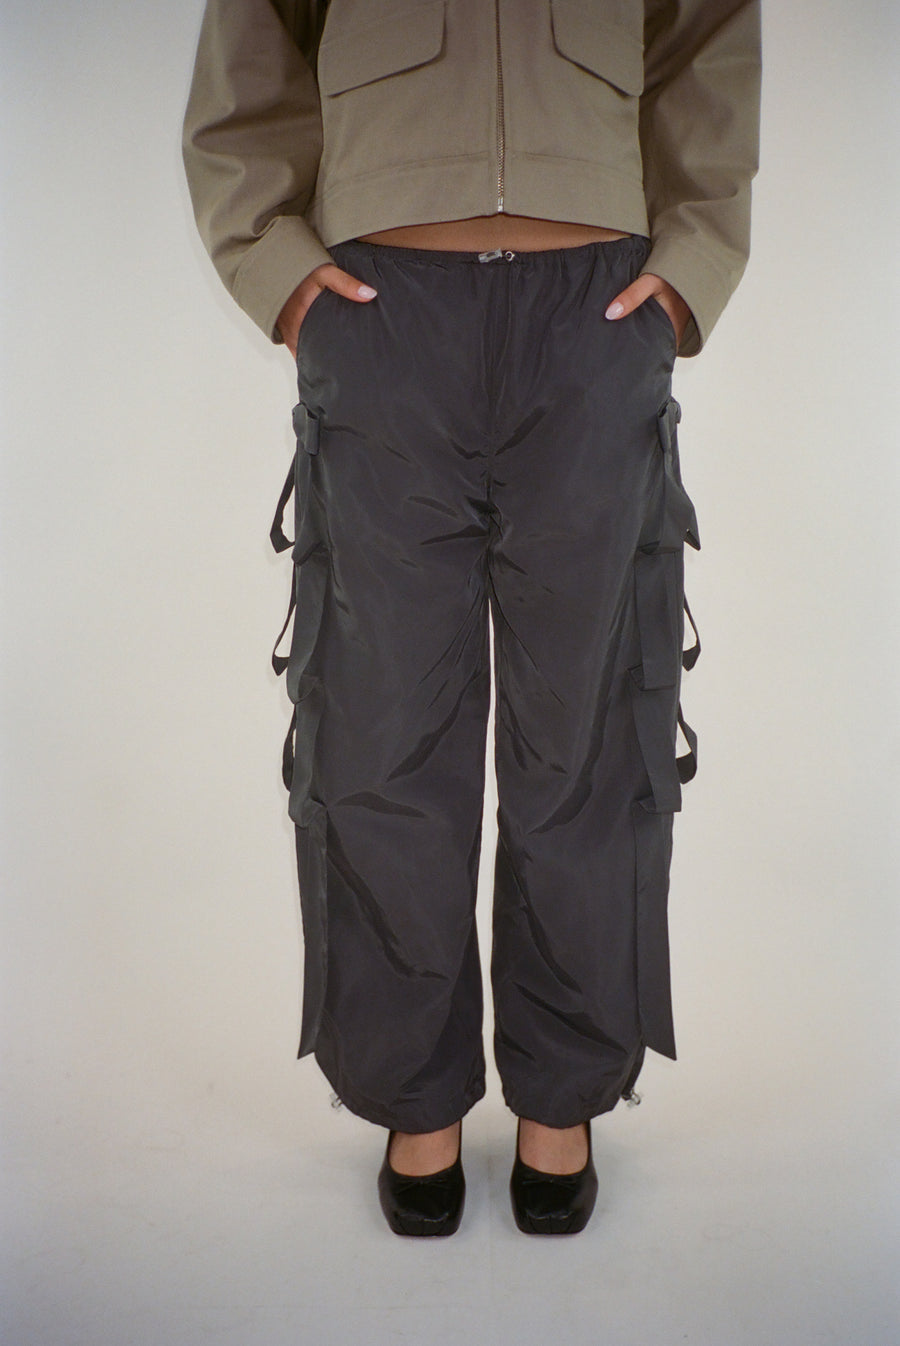 Trackpant in charcoal with tacked bow detail at sides on model